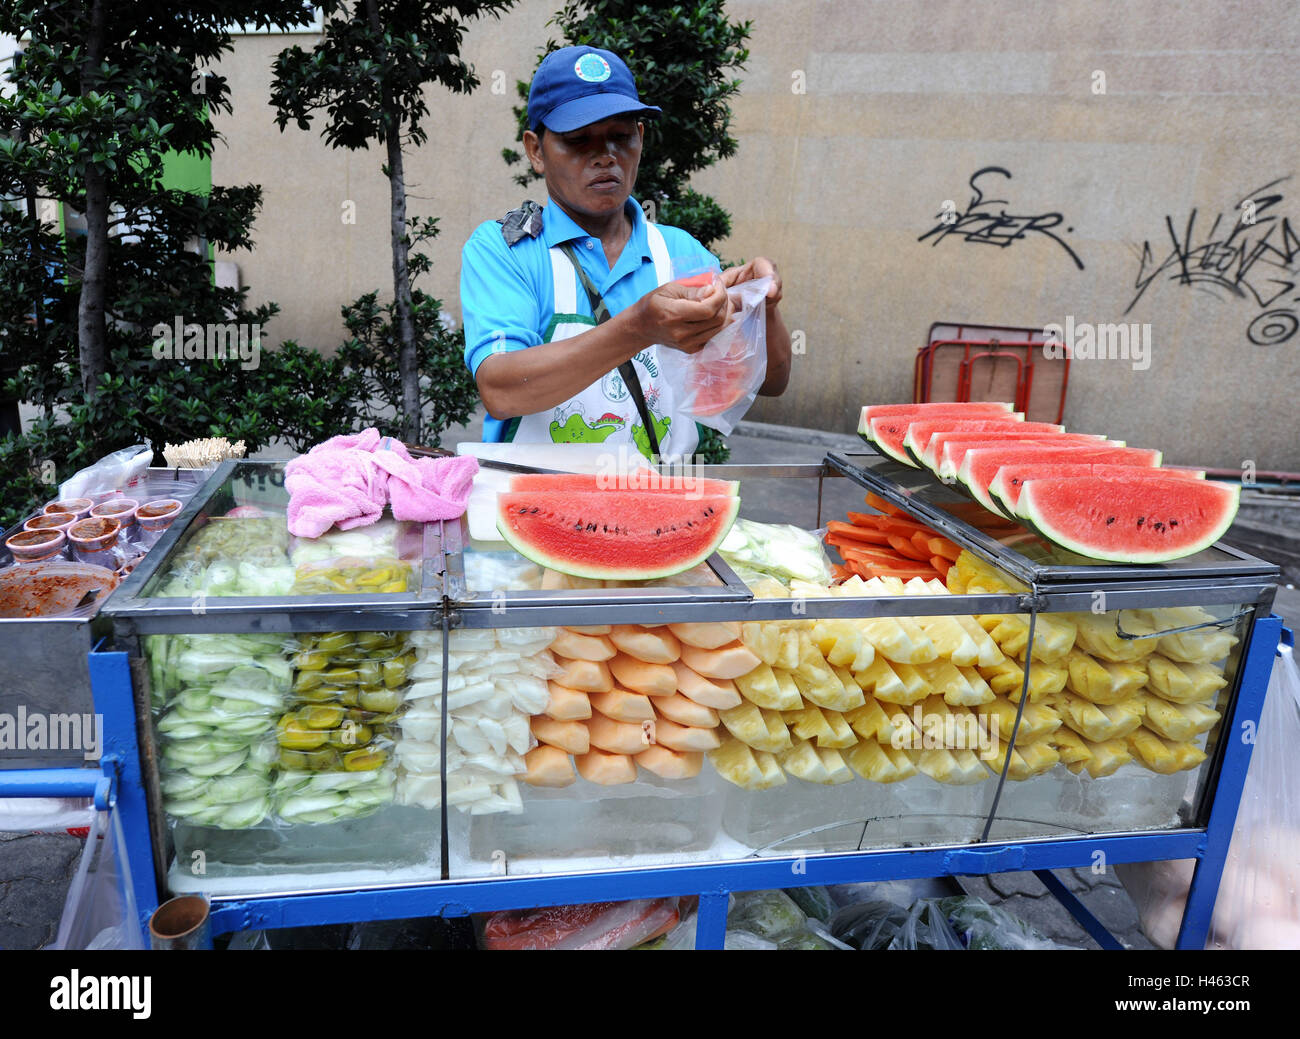 Thailand, local, fruits, sales, man, person, fruit, freshly, sell, melons, pineapple, bottle, sales booth, occupation, seller, work, headgear, sign cap, cap, Stock Photo